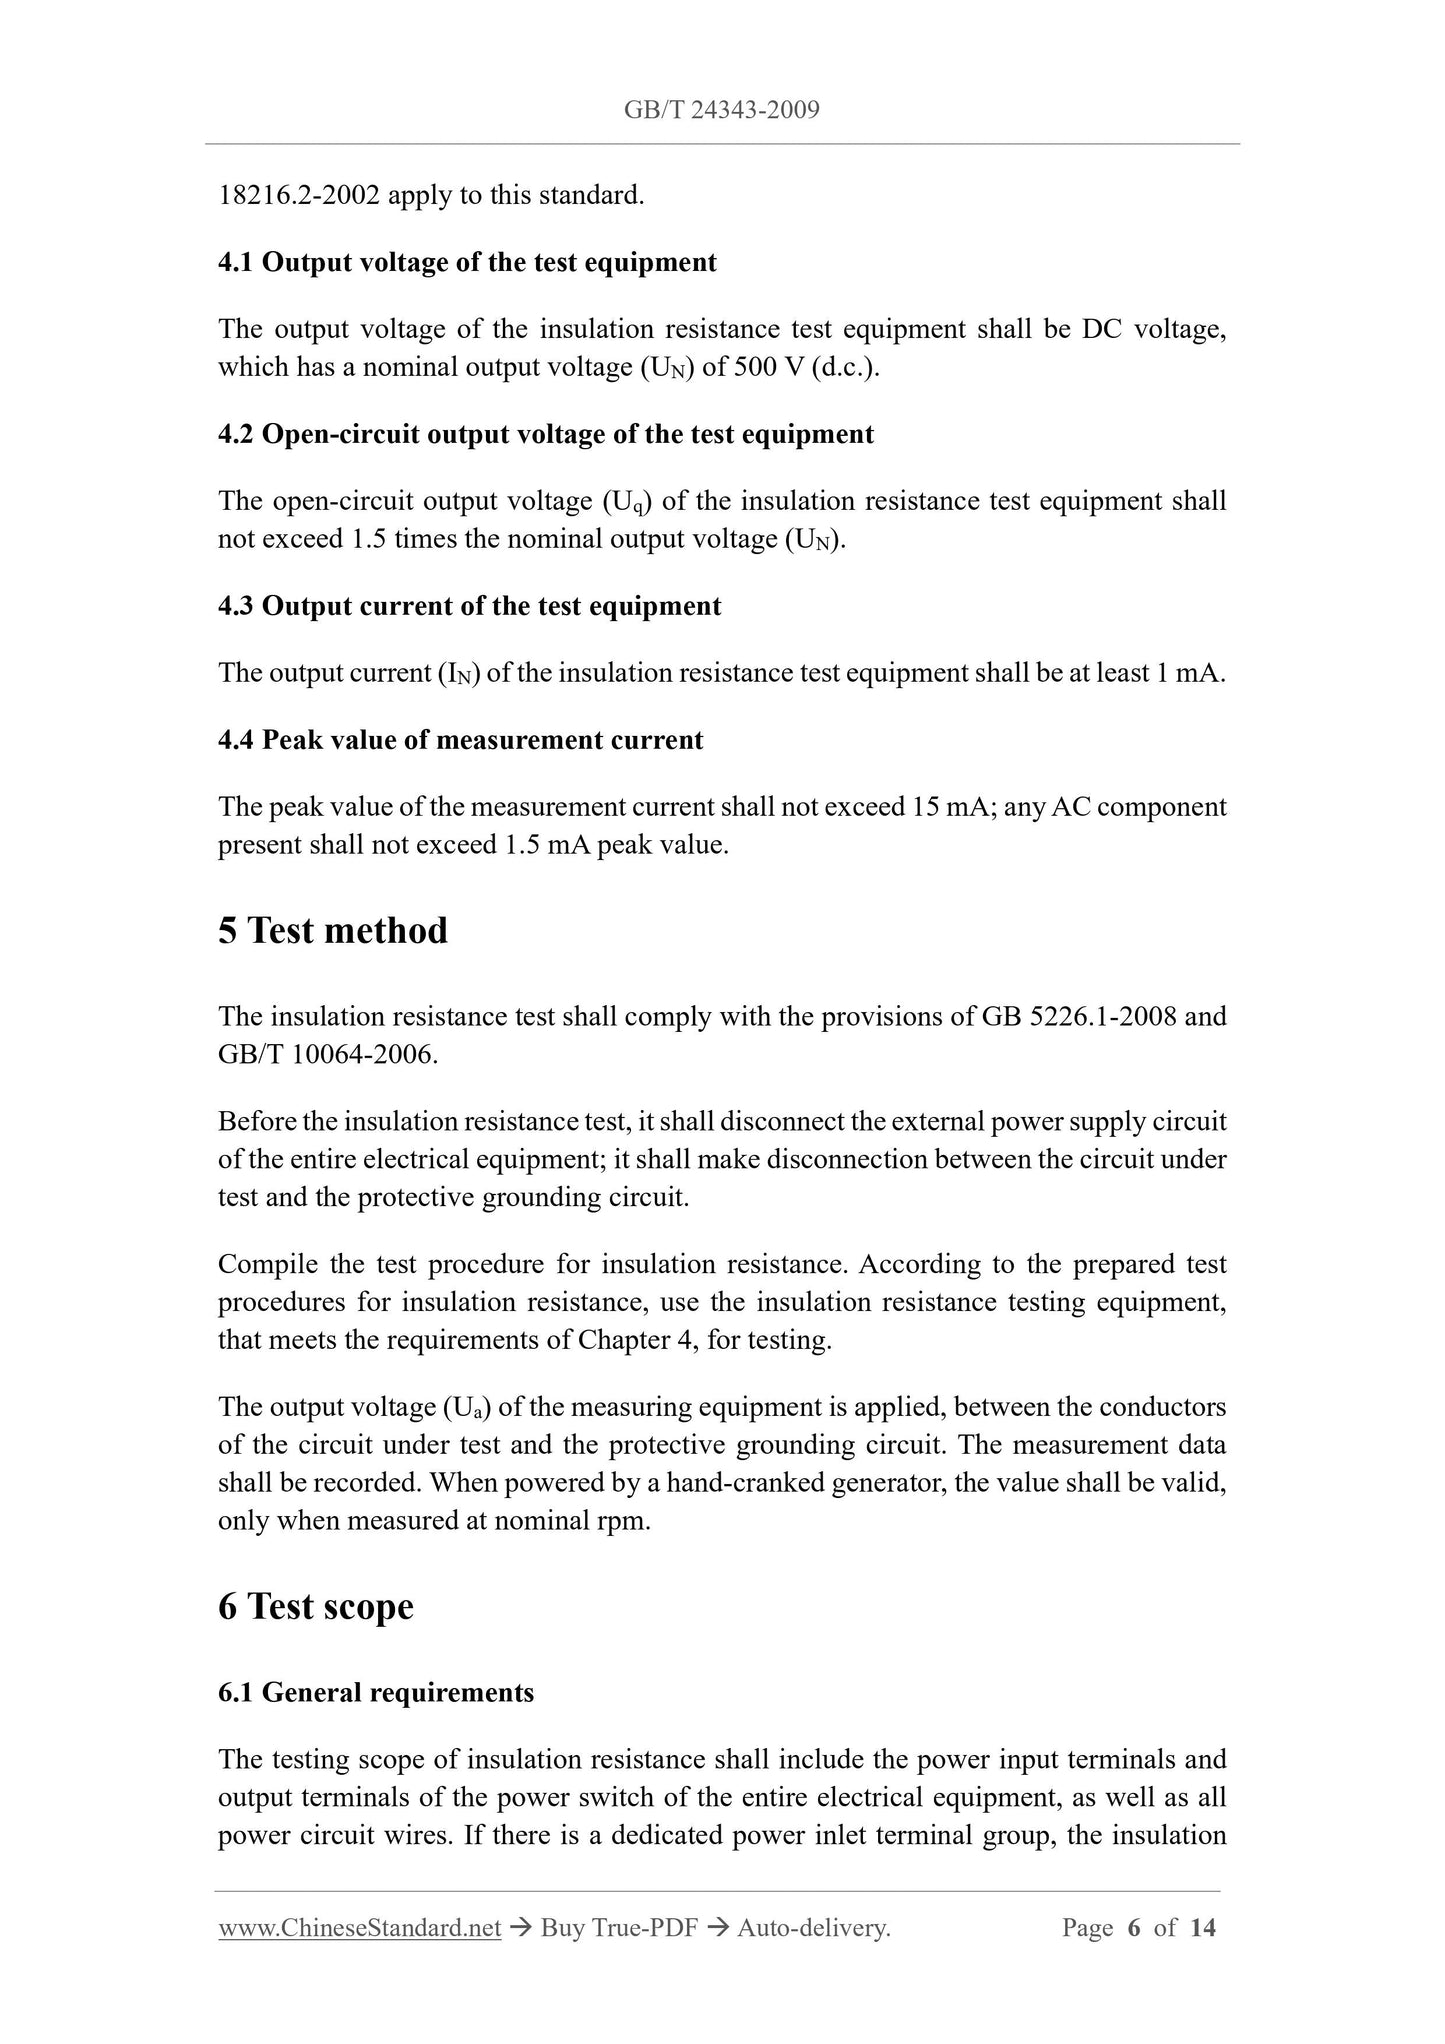 GB/T 24343-2009 Page 4